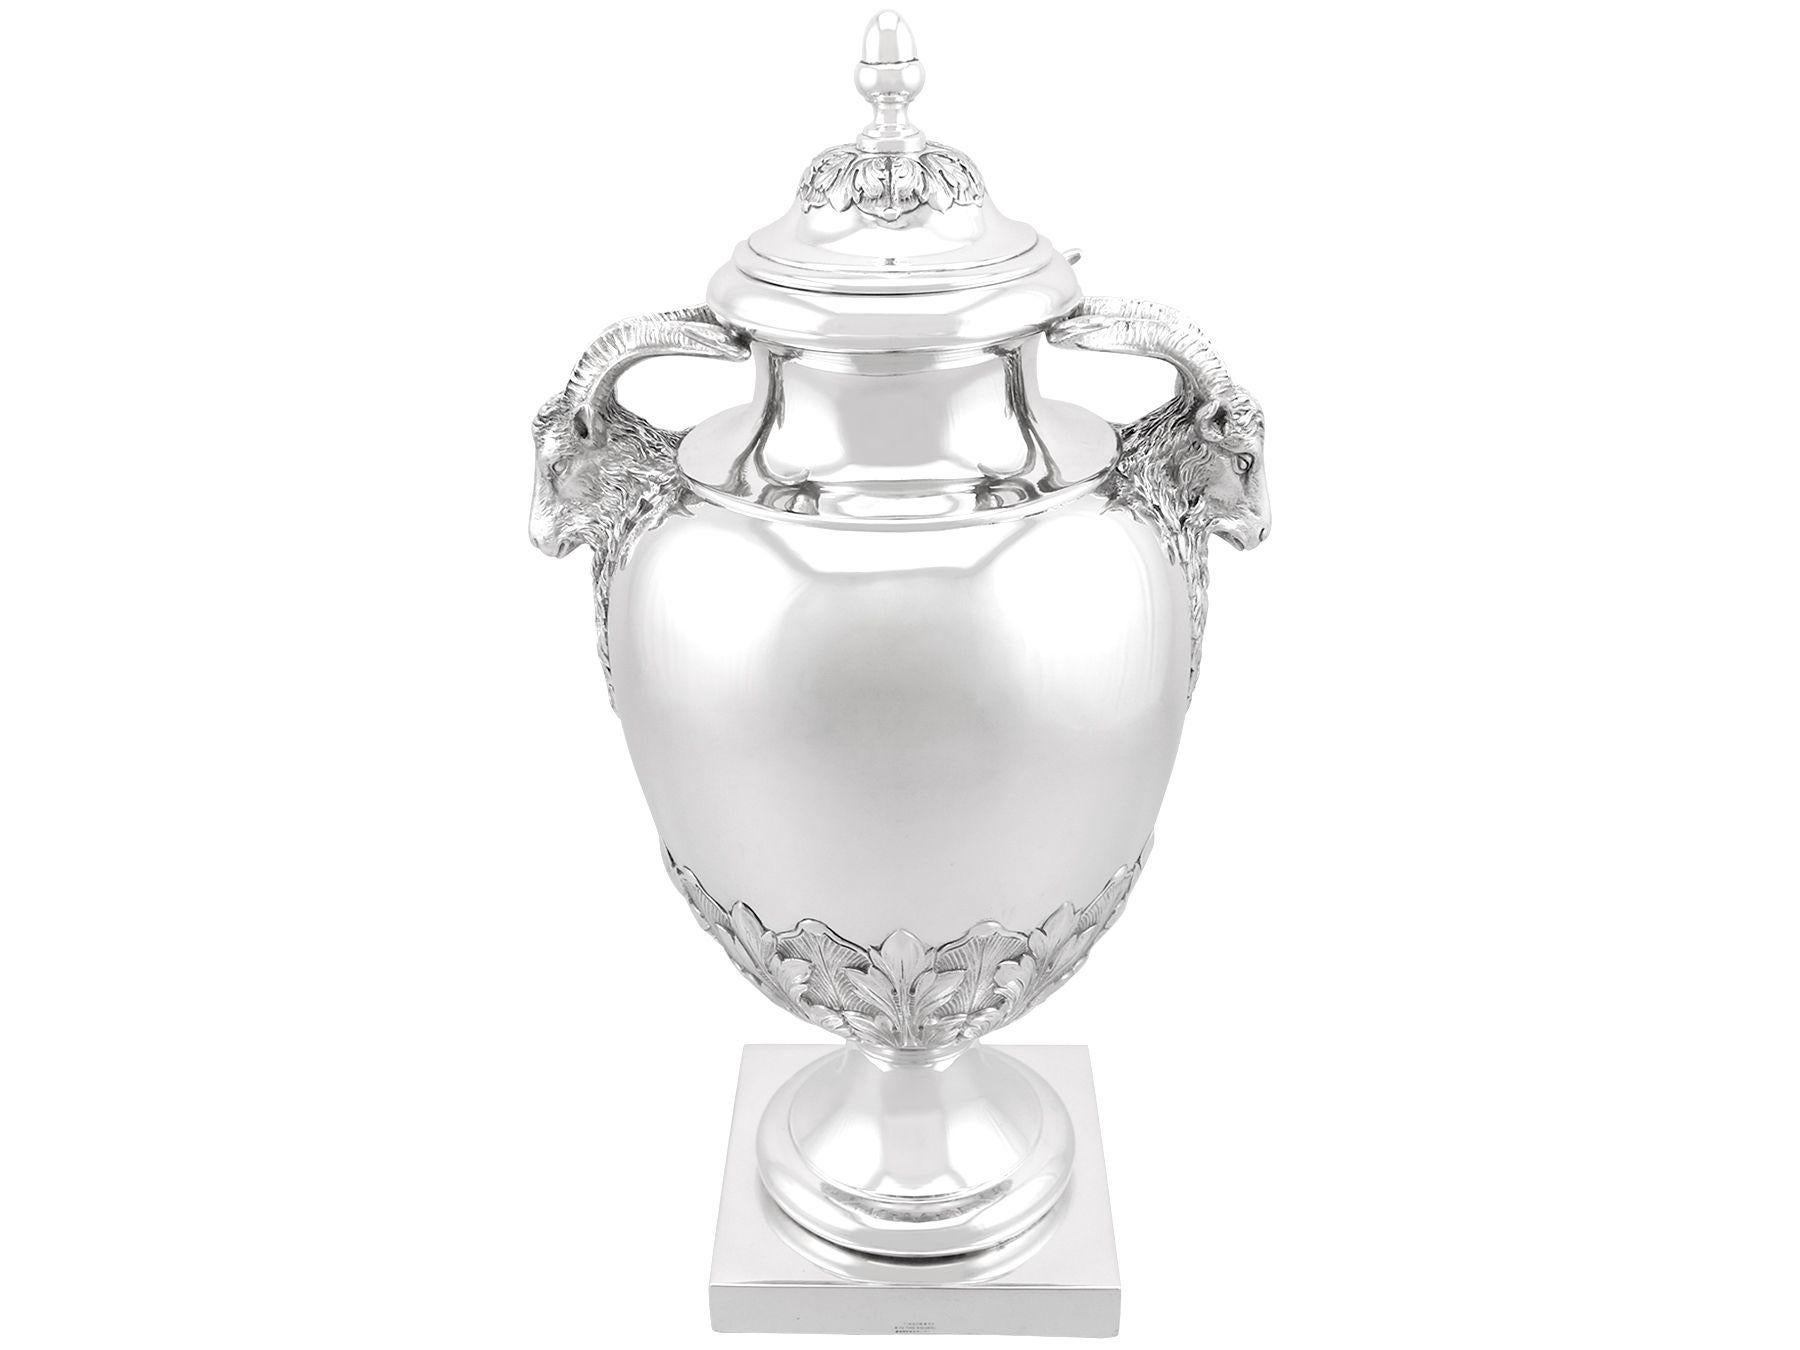 An magnificent, fine and impressive antique George V English sterling silver covered vase; an addition to our ornamental silverware collection

This magnificent antique George V sterling silver vase has a plain baluster form onto a circular